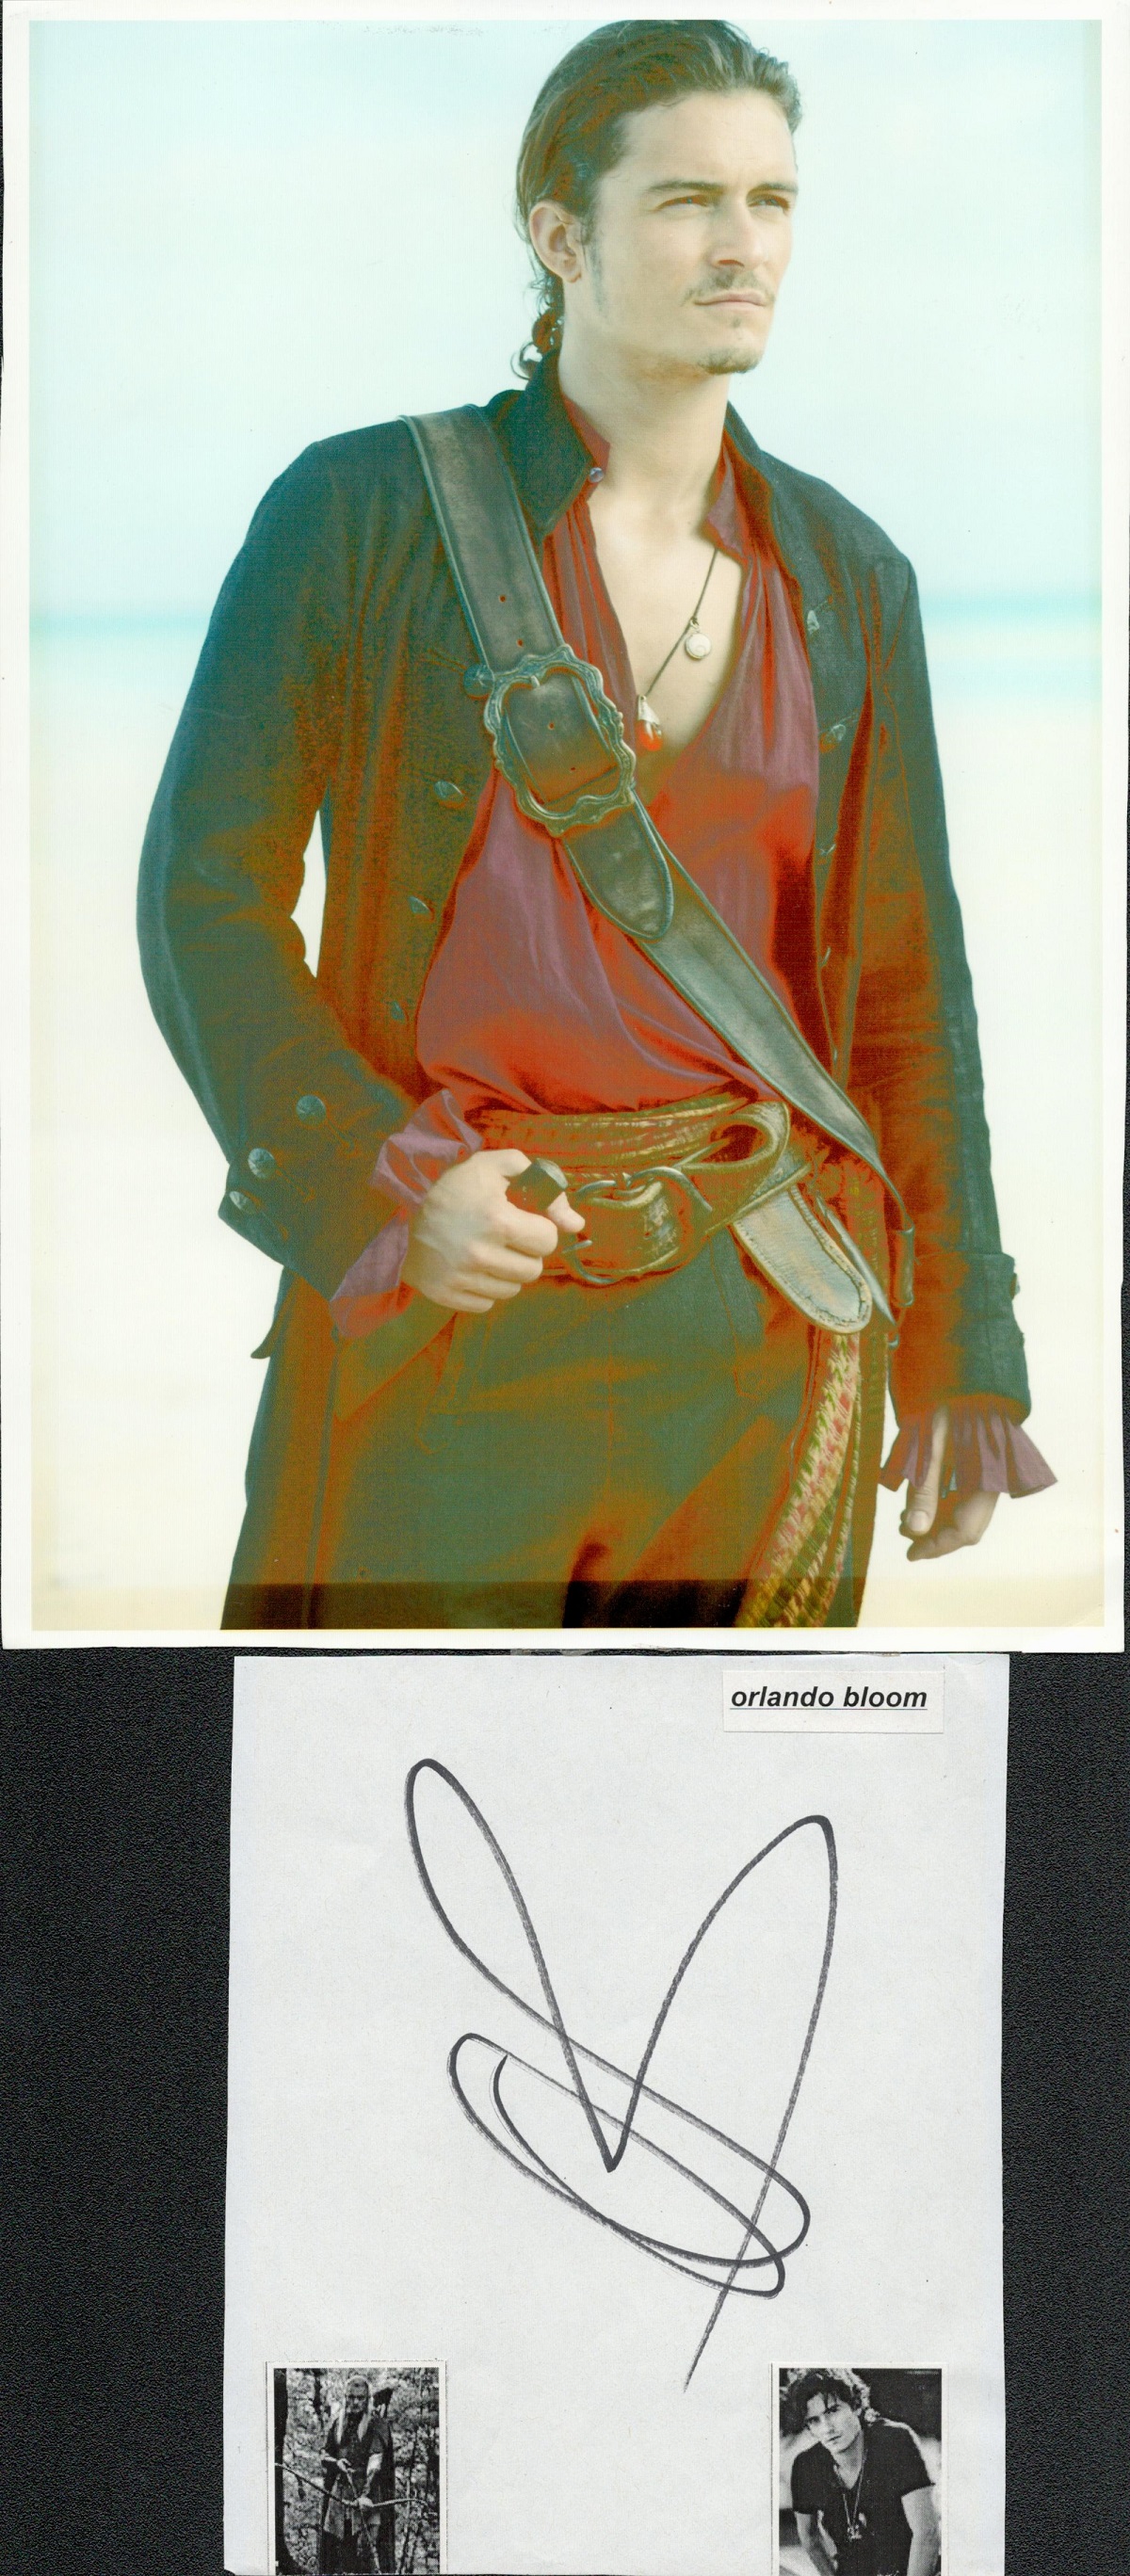 Orlando Bloom signed 6x5 album page comes with 10x8 Pirates of the Caribbean colour photo. Good - Image 2 of 2